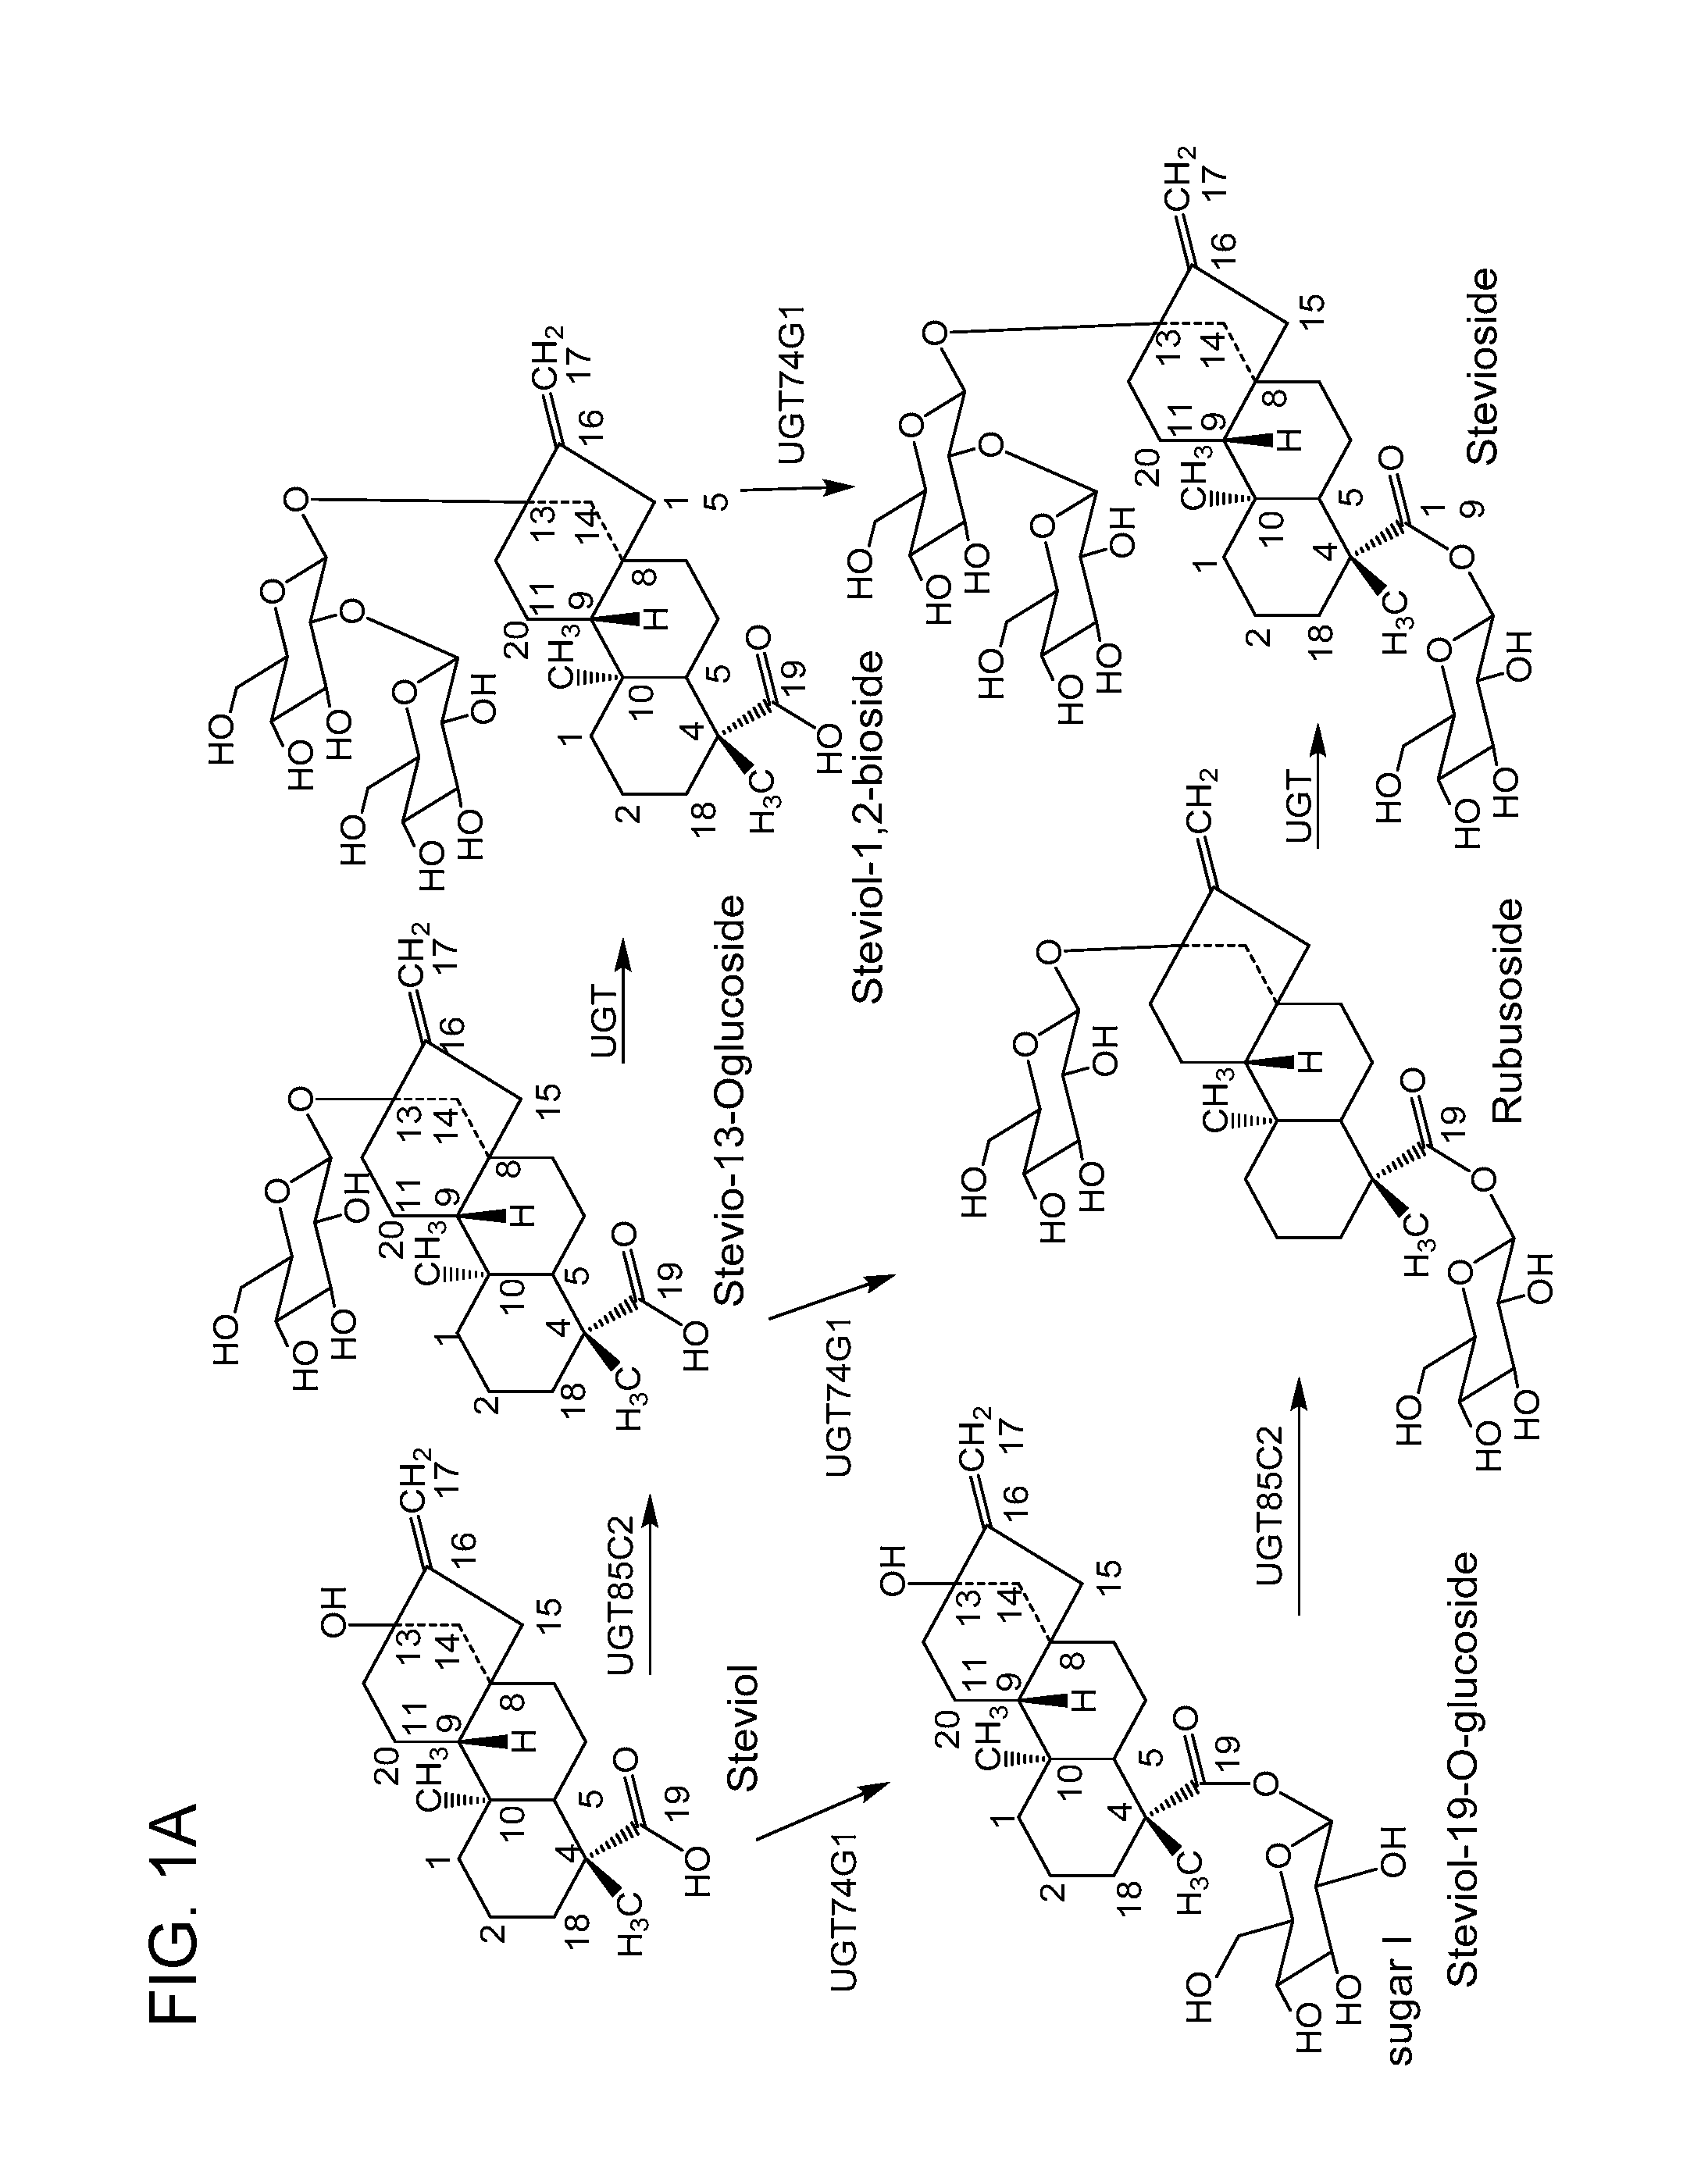 Non-caloric sweeteners and methods for synthesizing